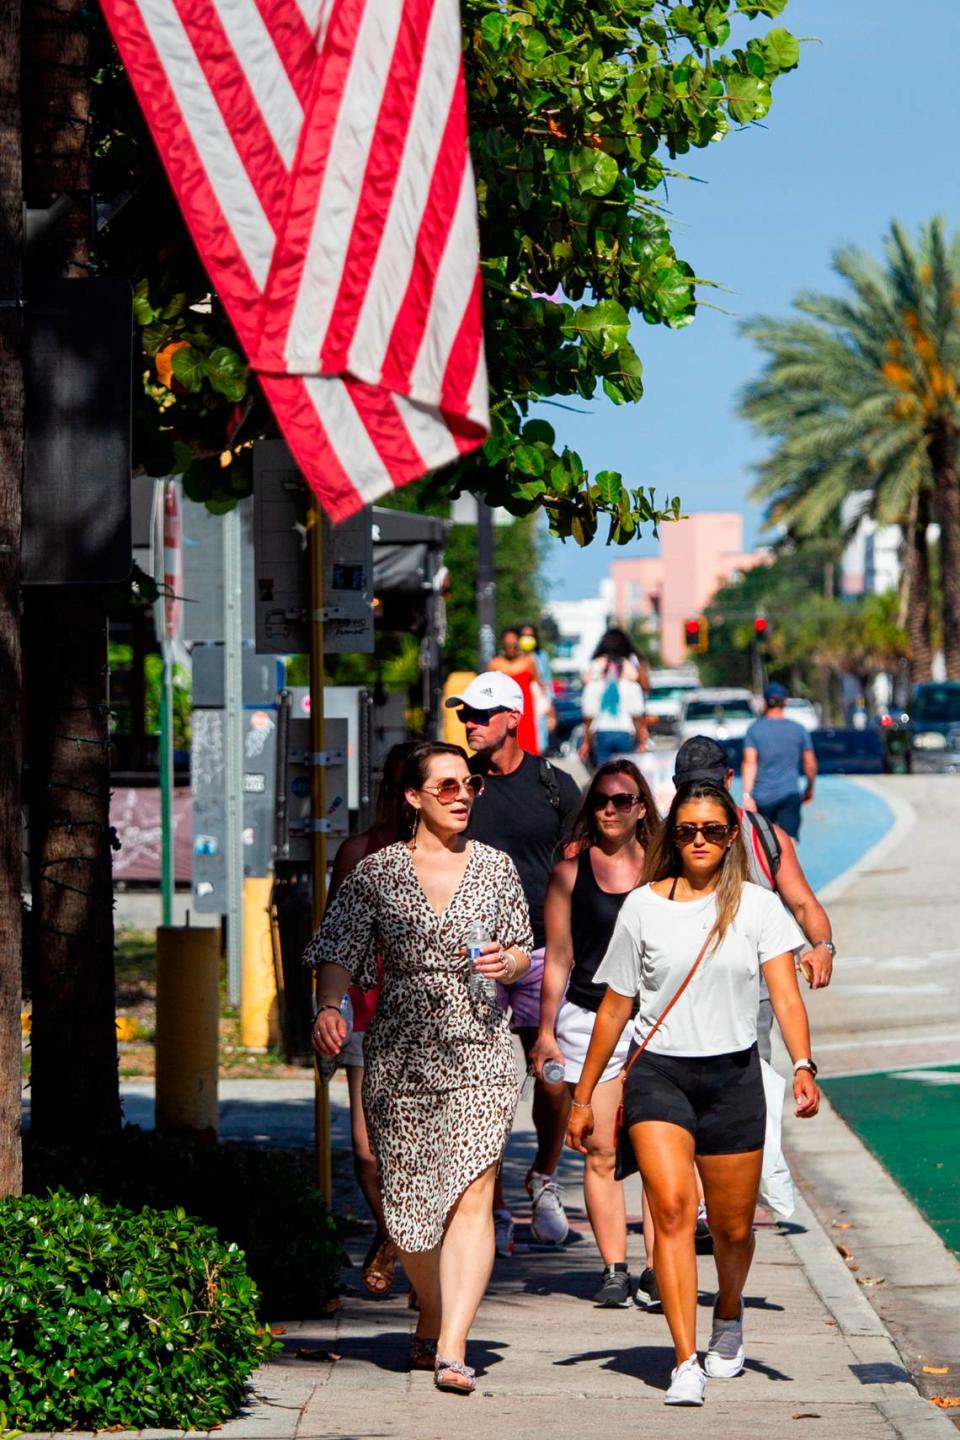 Downtown Fort Lauderdale saw a big jump in pedestrian foot traffic between 2018 and 2022, according to the Las Olas Association and Fort Lauderdale Downtown Development Authority’s 2023 retail market report.